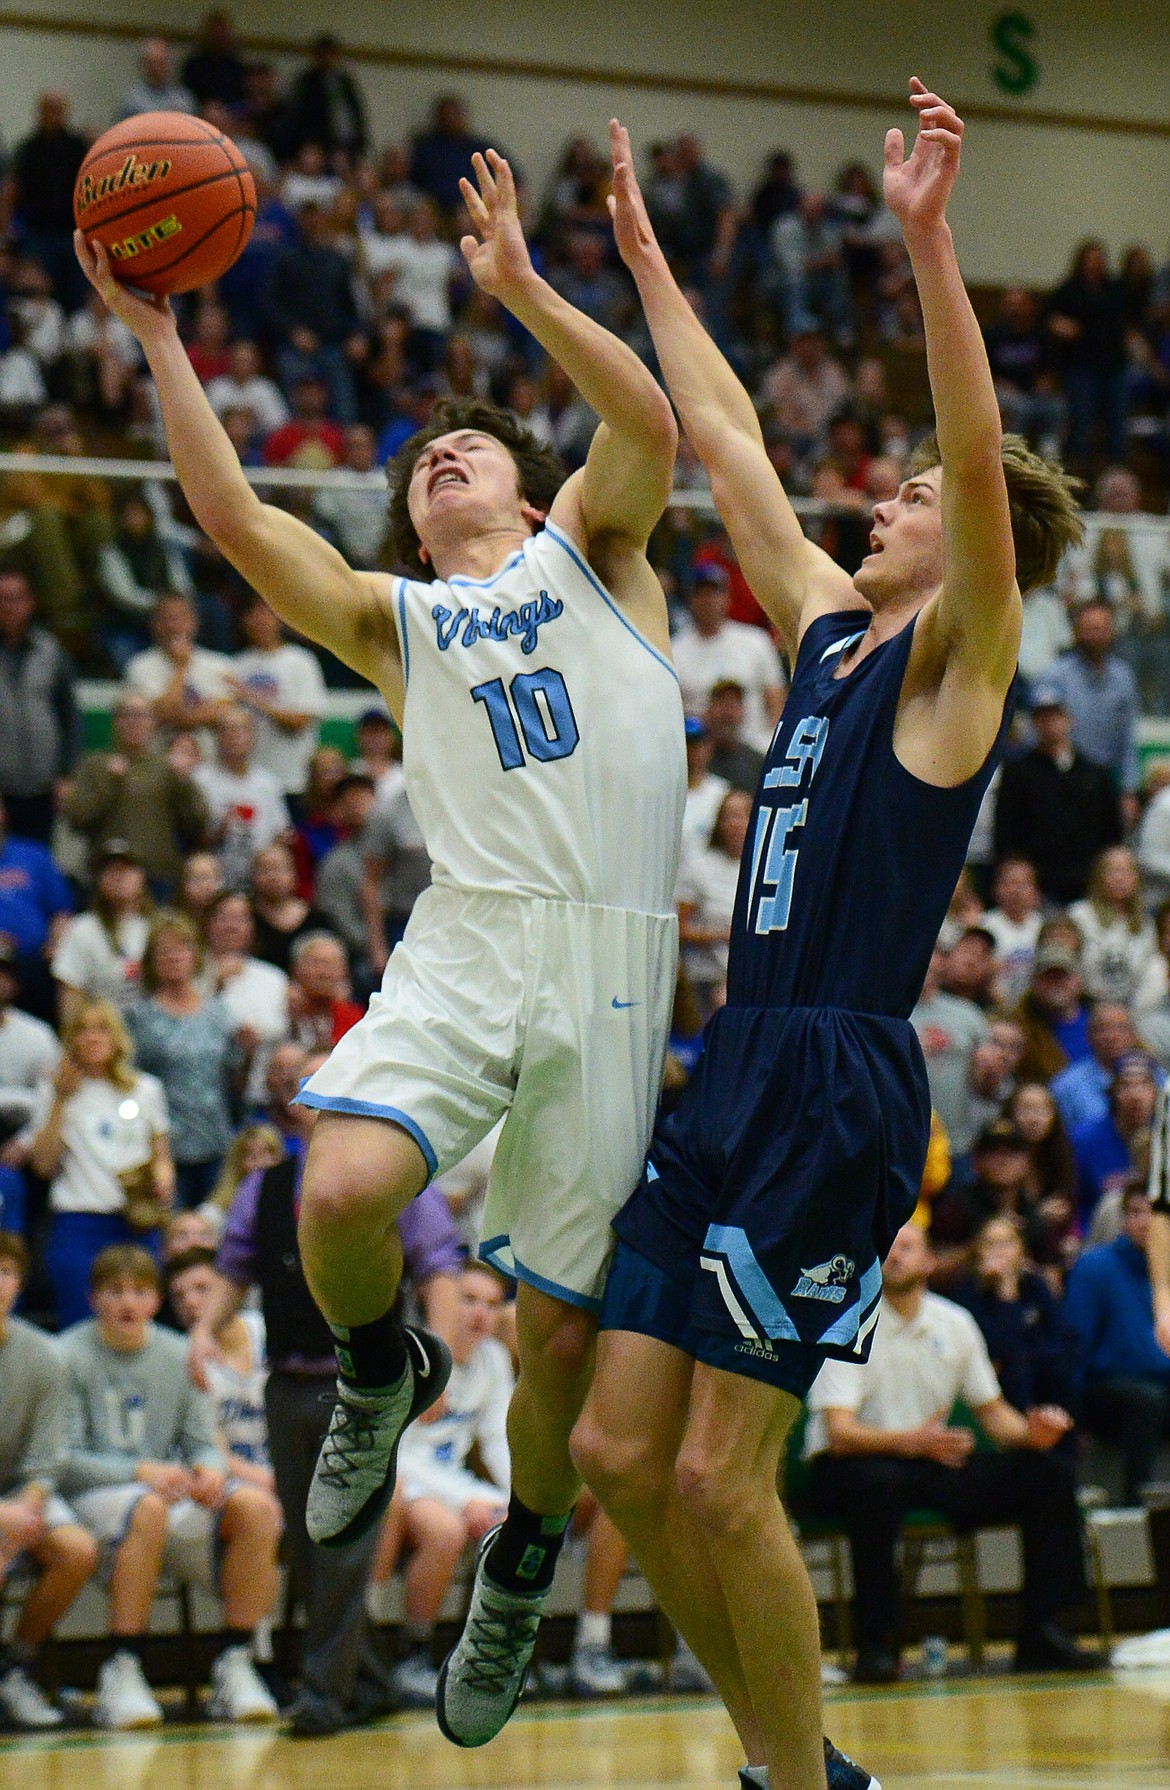 Bigfork's Randy Stultz (10) powers to the hoop past Loyola Sacred Heart's Cooper Waters (15) in the State Class B boys' basketball championship at the Belgrade Special Events Center in Belgrade on Friday. (Casey Kreider/Daily Inter Lake)